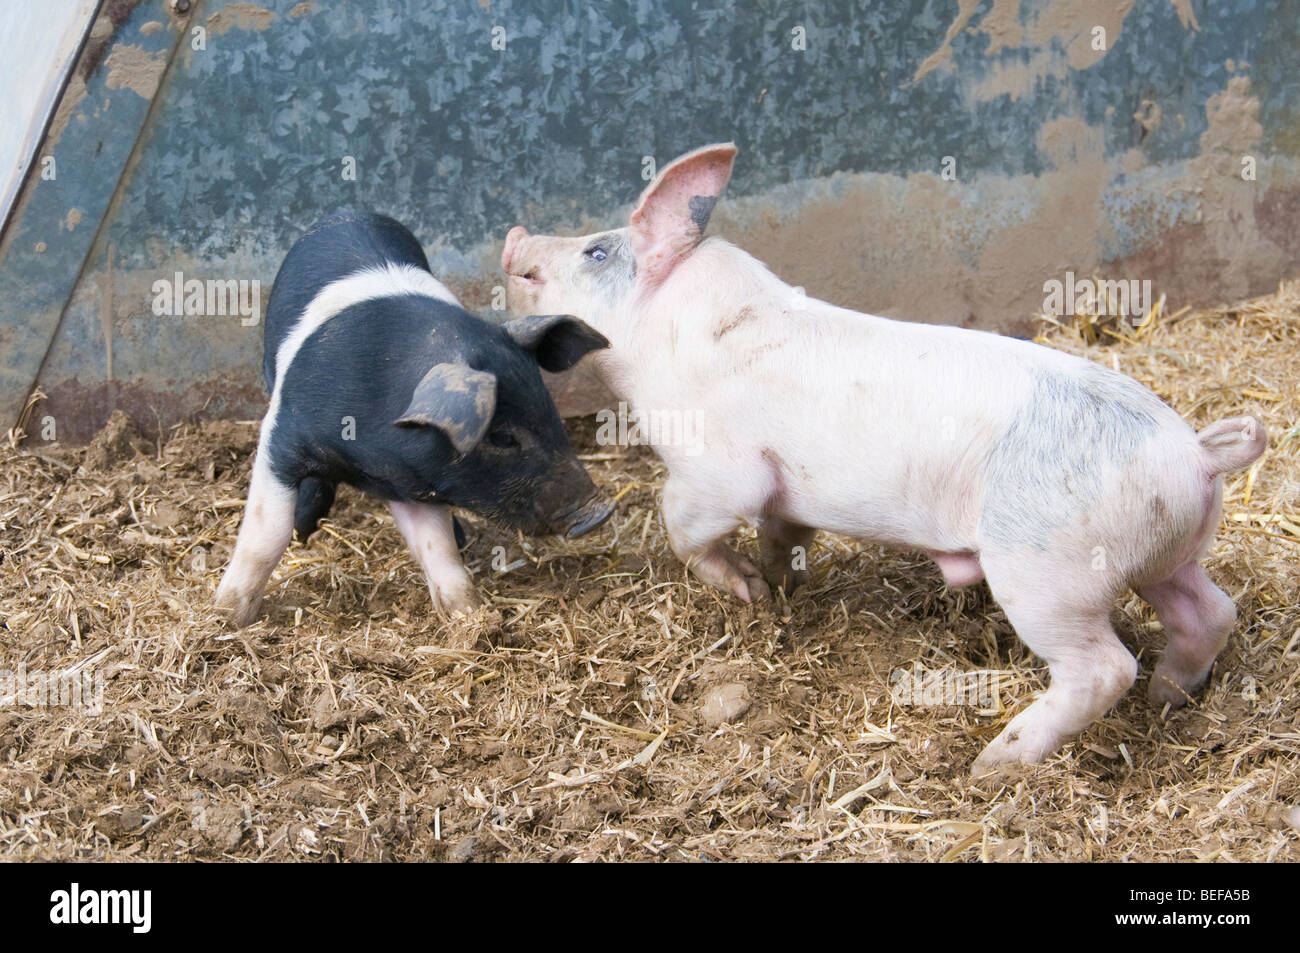 Two piglets chasing each other Stock Photo